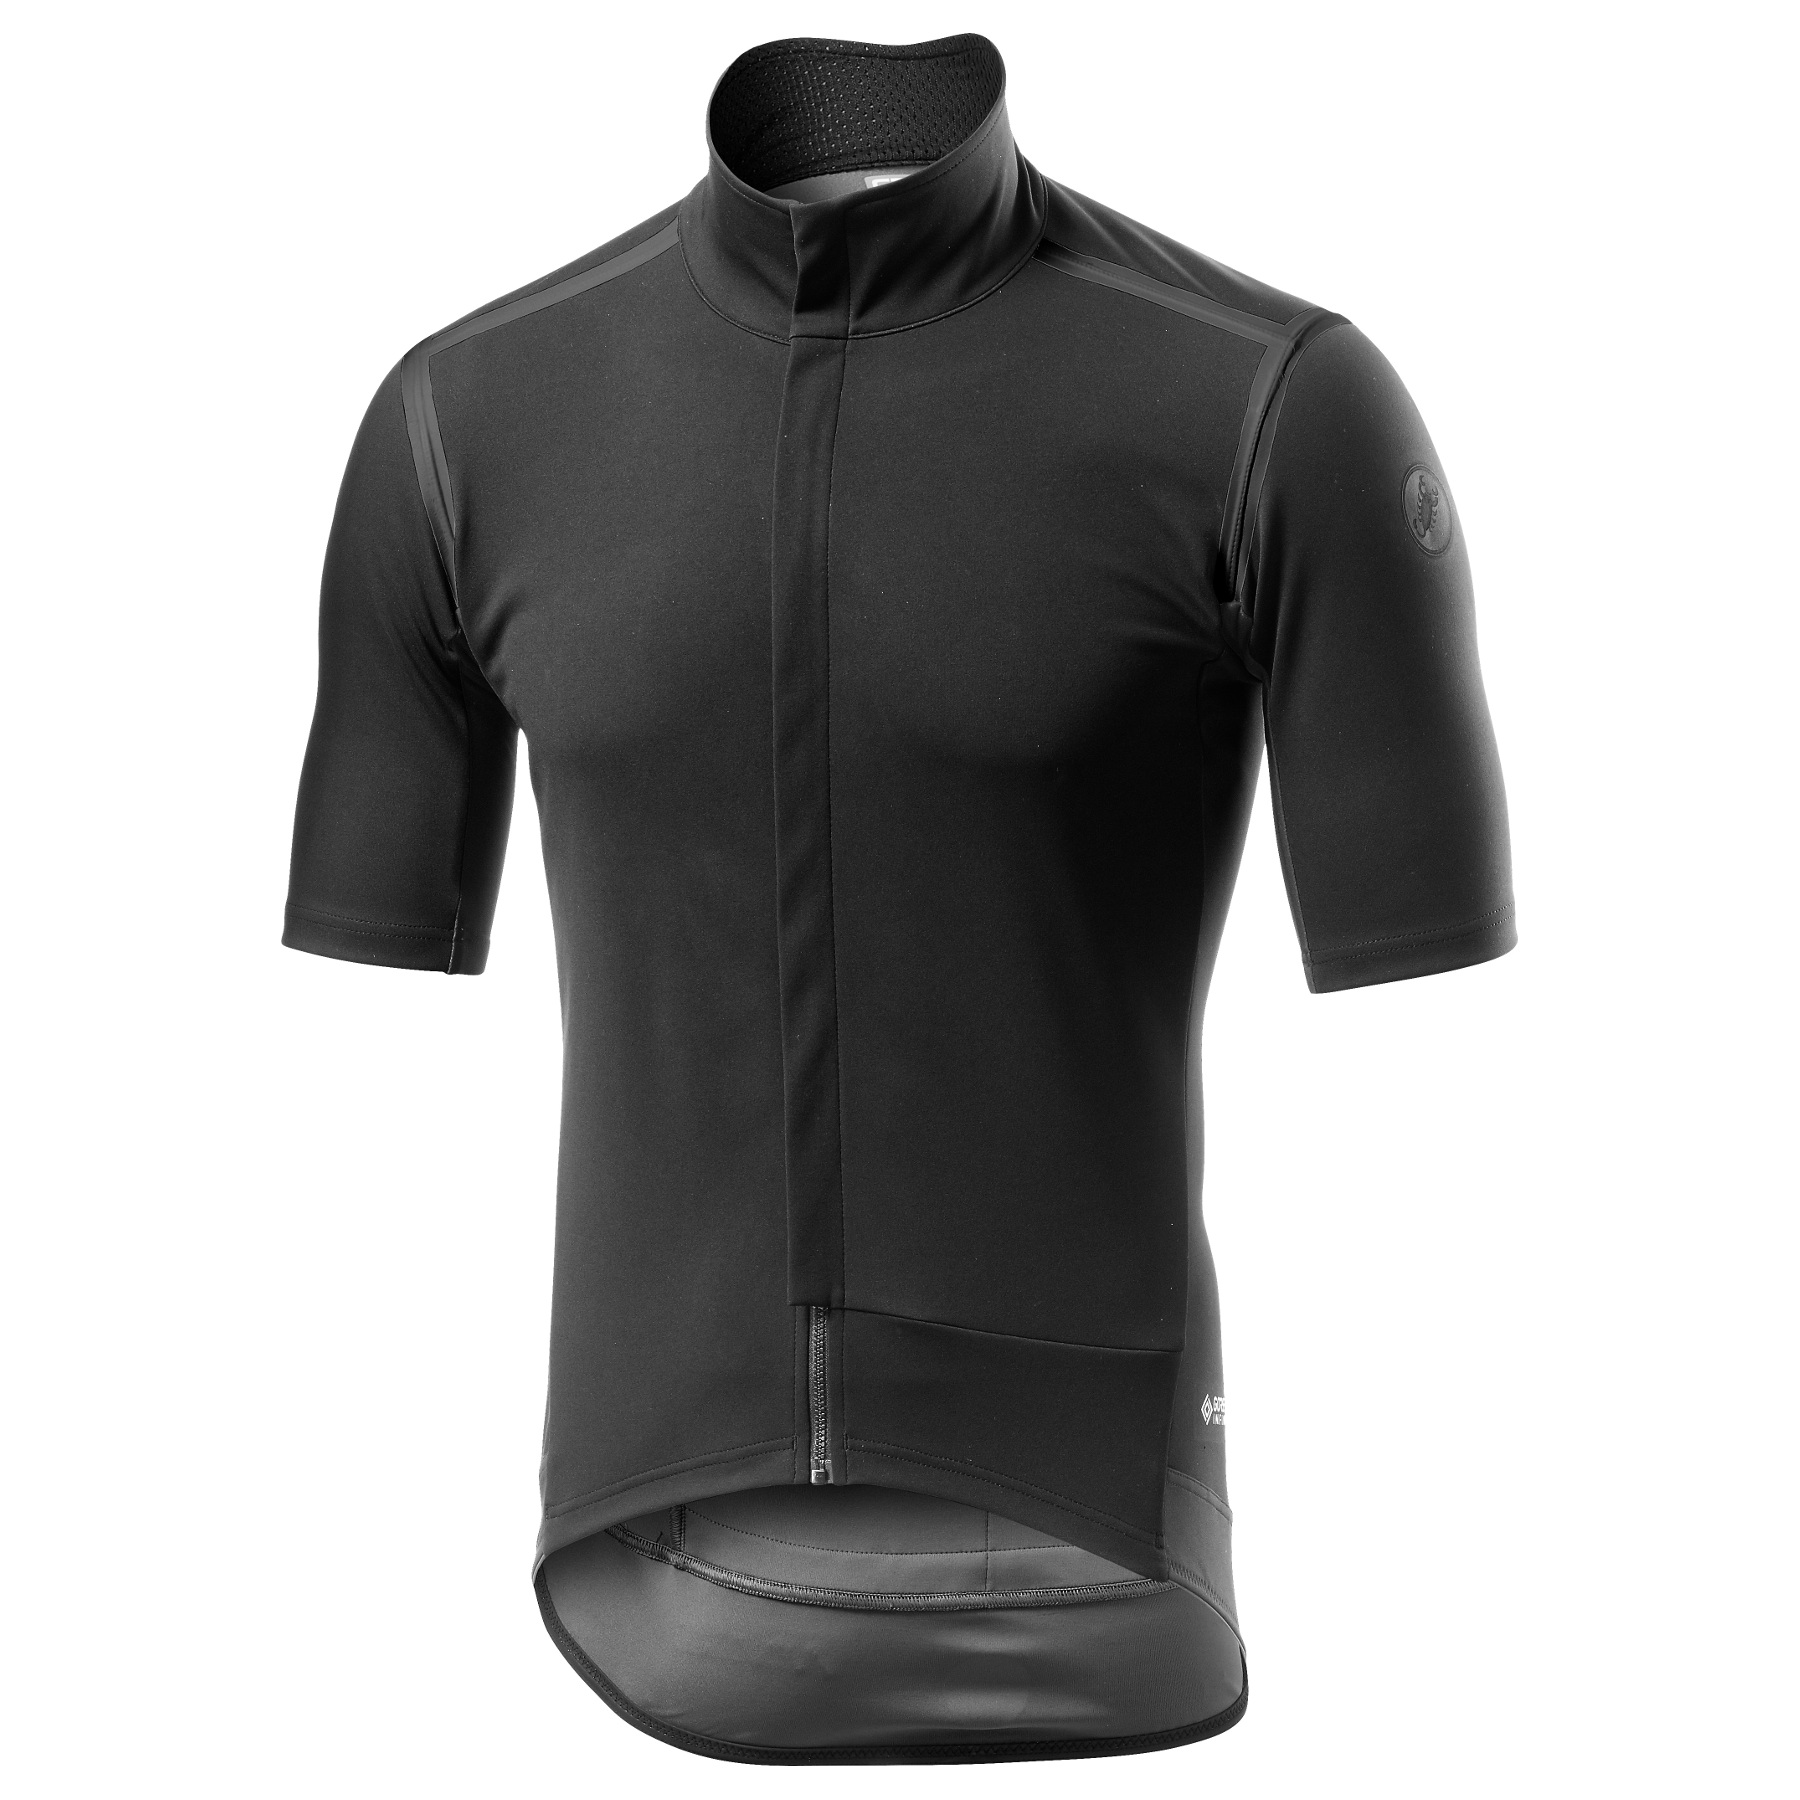 Picture of Castelli Gabba RoS Jersey / Jacket - black out 710